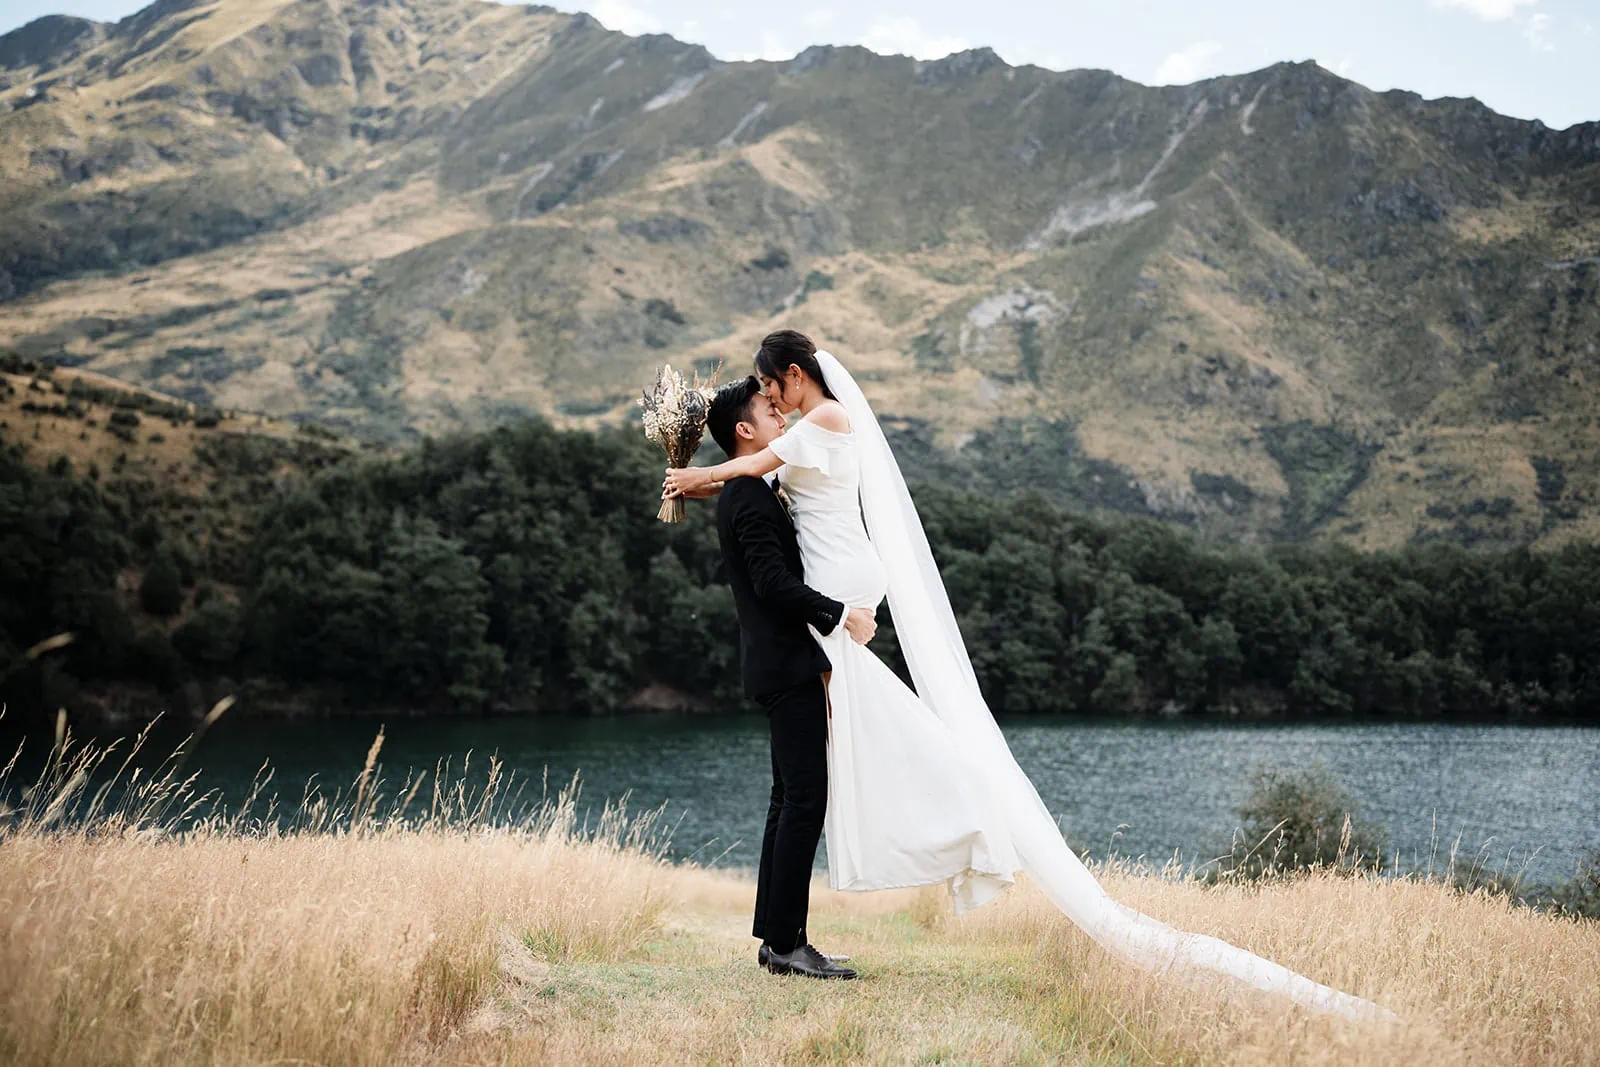 A pre-wedding photoshoot of Dios and Carlyn at Cecil Peak, Queenstown, with a breathtaking lake backdrop.